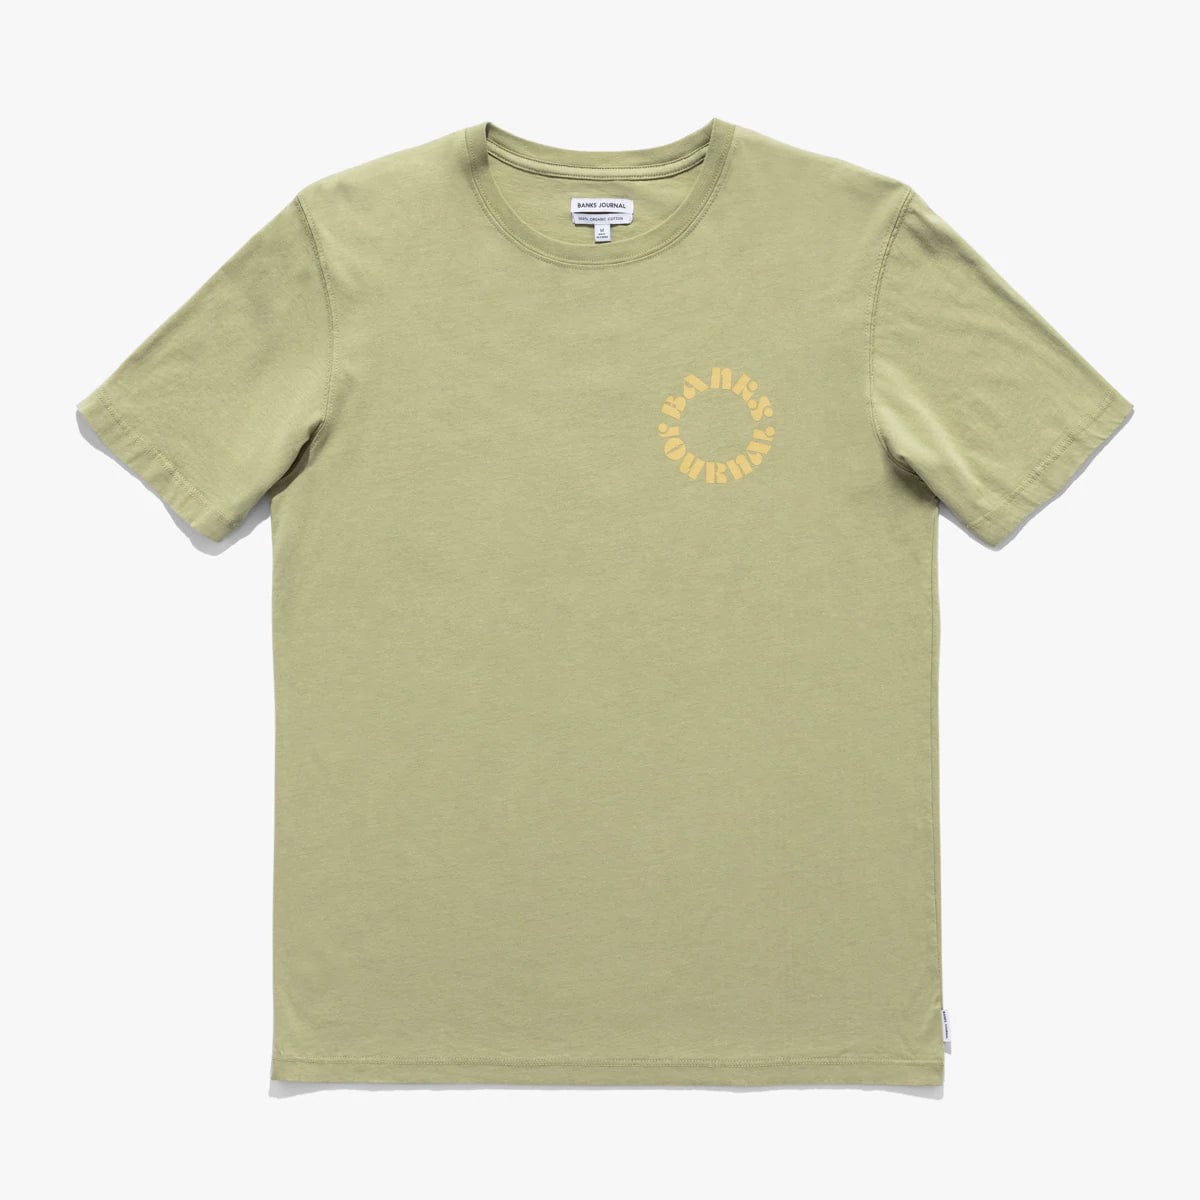 Banks Journal T-shirt Ceremony Classic Green Tee